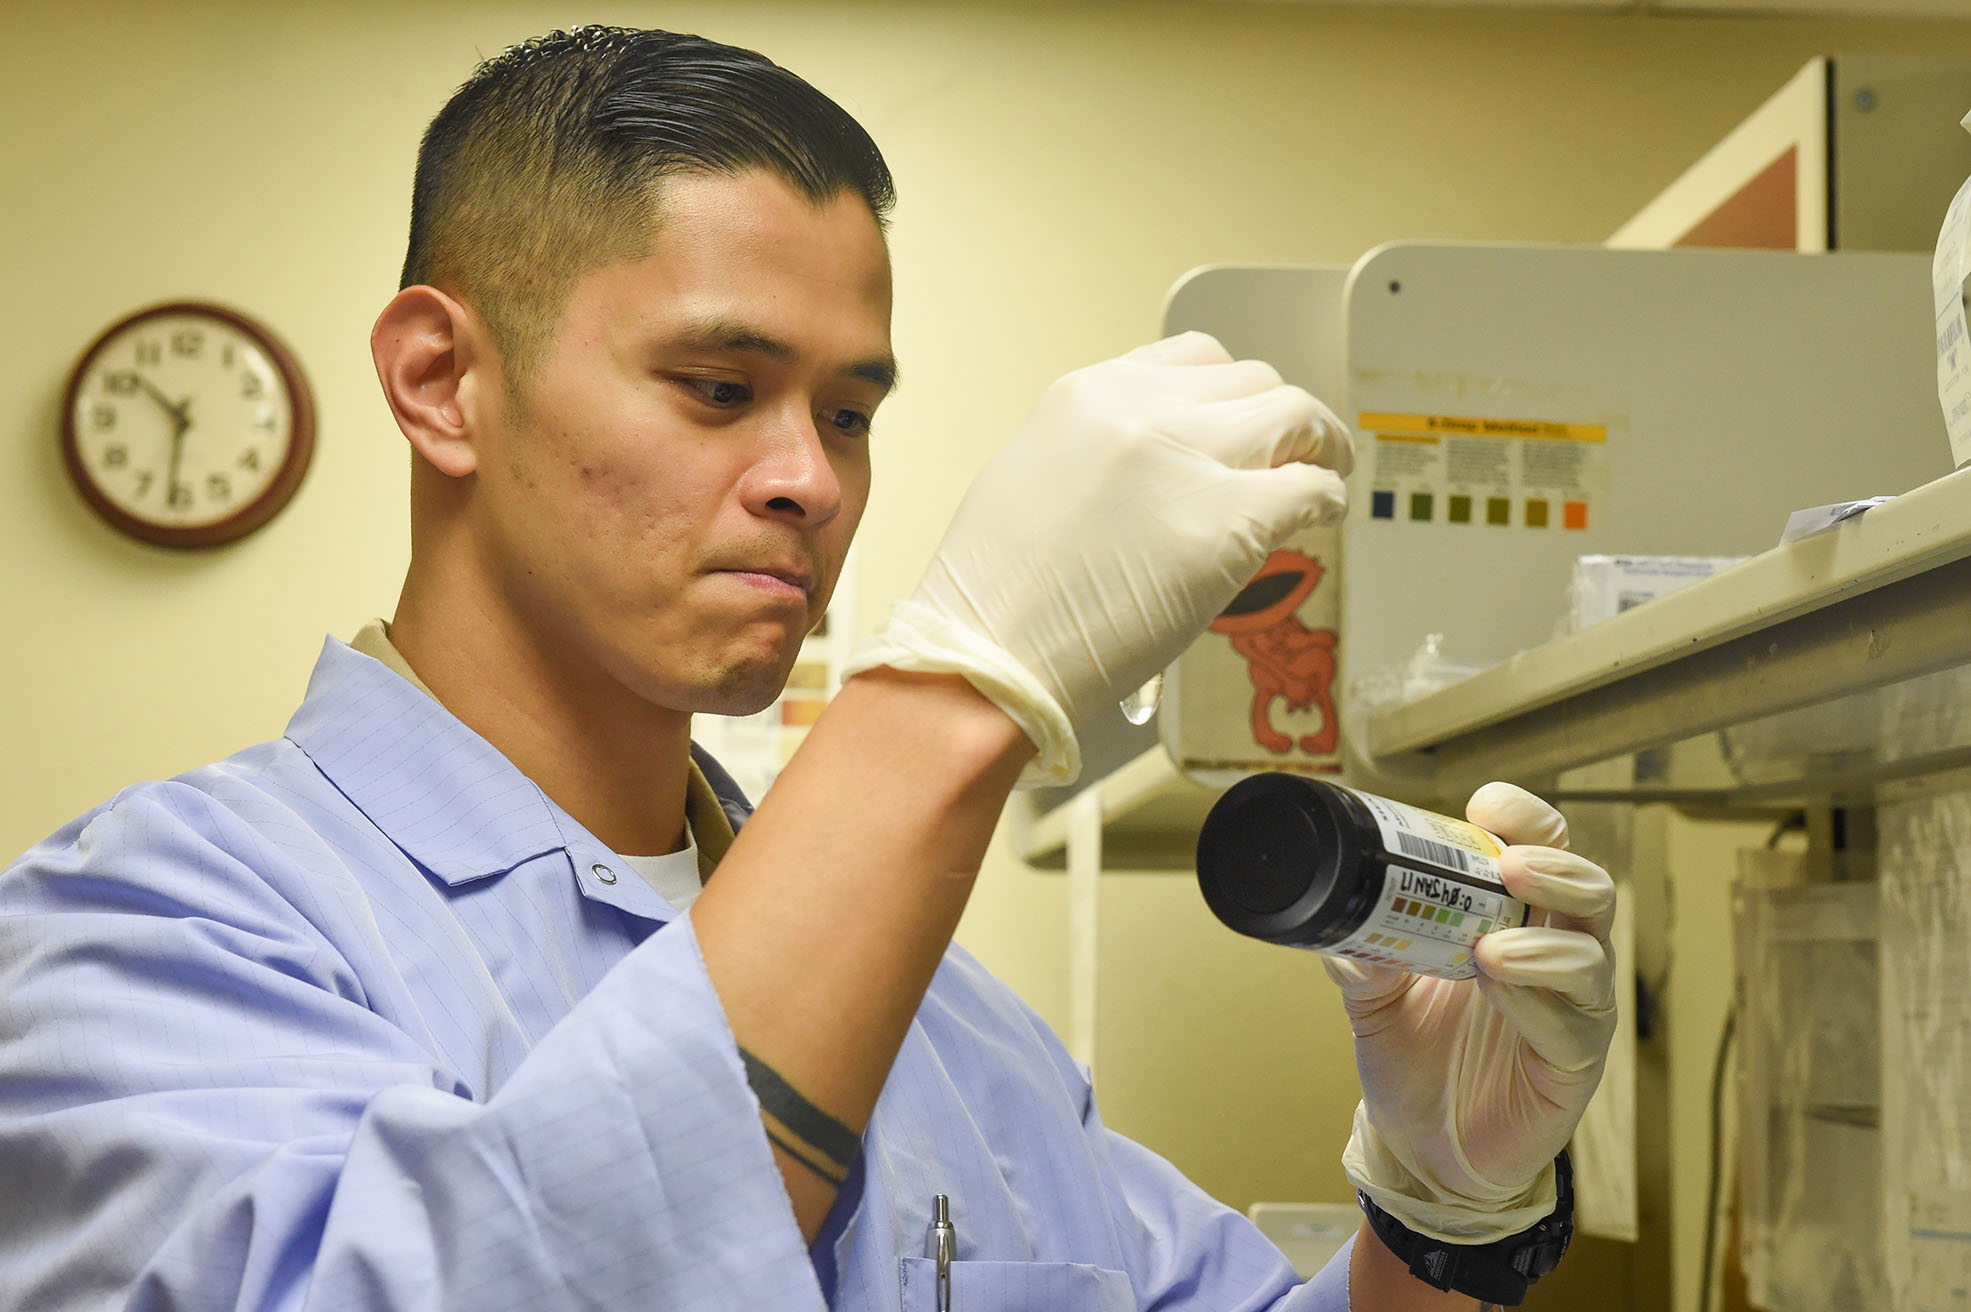 170107-N-CF658-025 (Jan.7, 2017) Hospital Corpsman 1st Class Oliver Arceo thoroughly examines a urinalysis sample to detect proper kidney function at North Island Branch Medical Clinic onboard Naval Air Station North Island, Coronado, Calif. A former active duty corpsman and now a reservist, Arceo spilts his time between being a USNR Hospital Corpsman and Clinical Lab Scientist in San Diego. (U.S. Navy photo by Mass Communications Specialist 2nd Class Amanda A. Hayes/Released) 